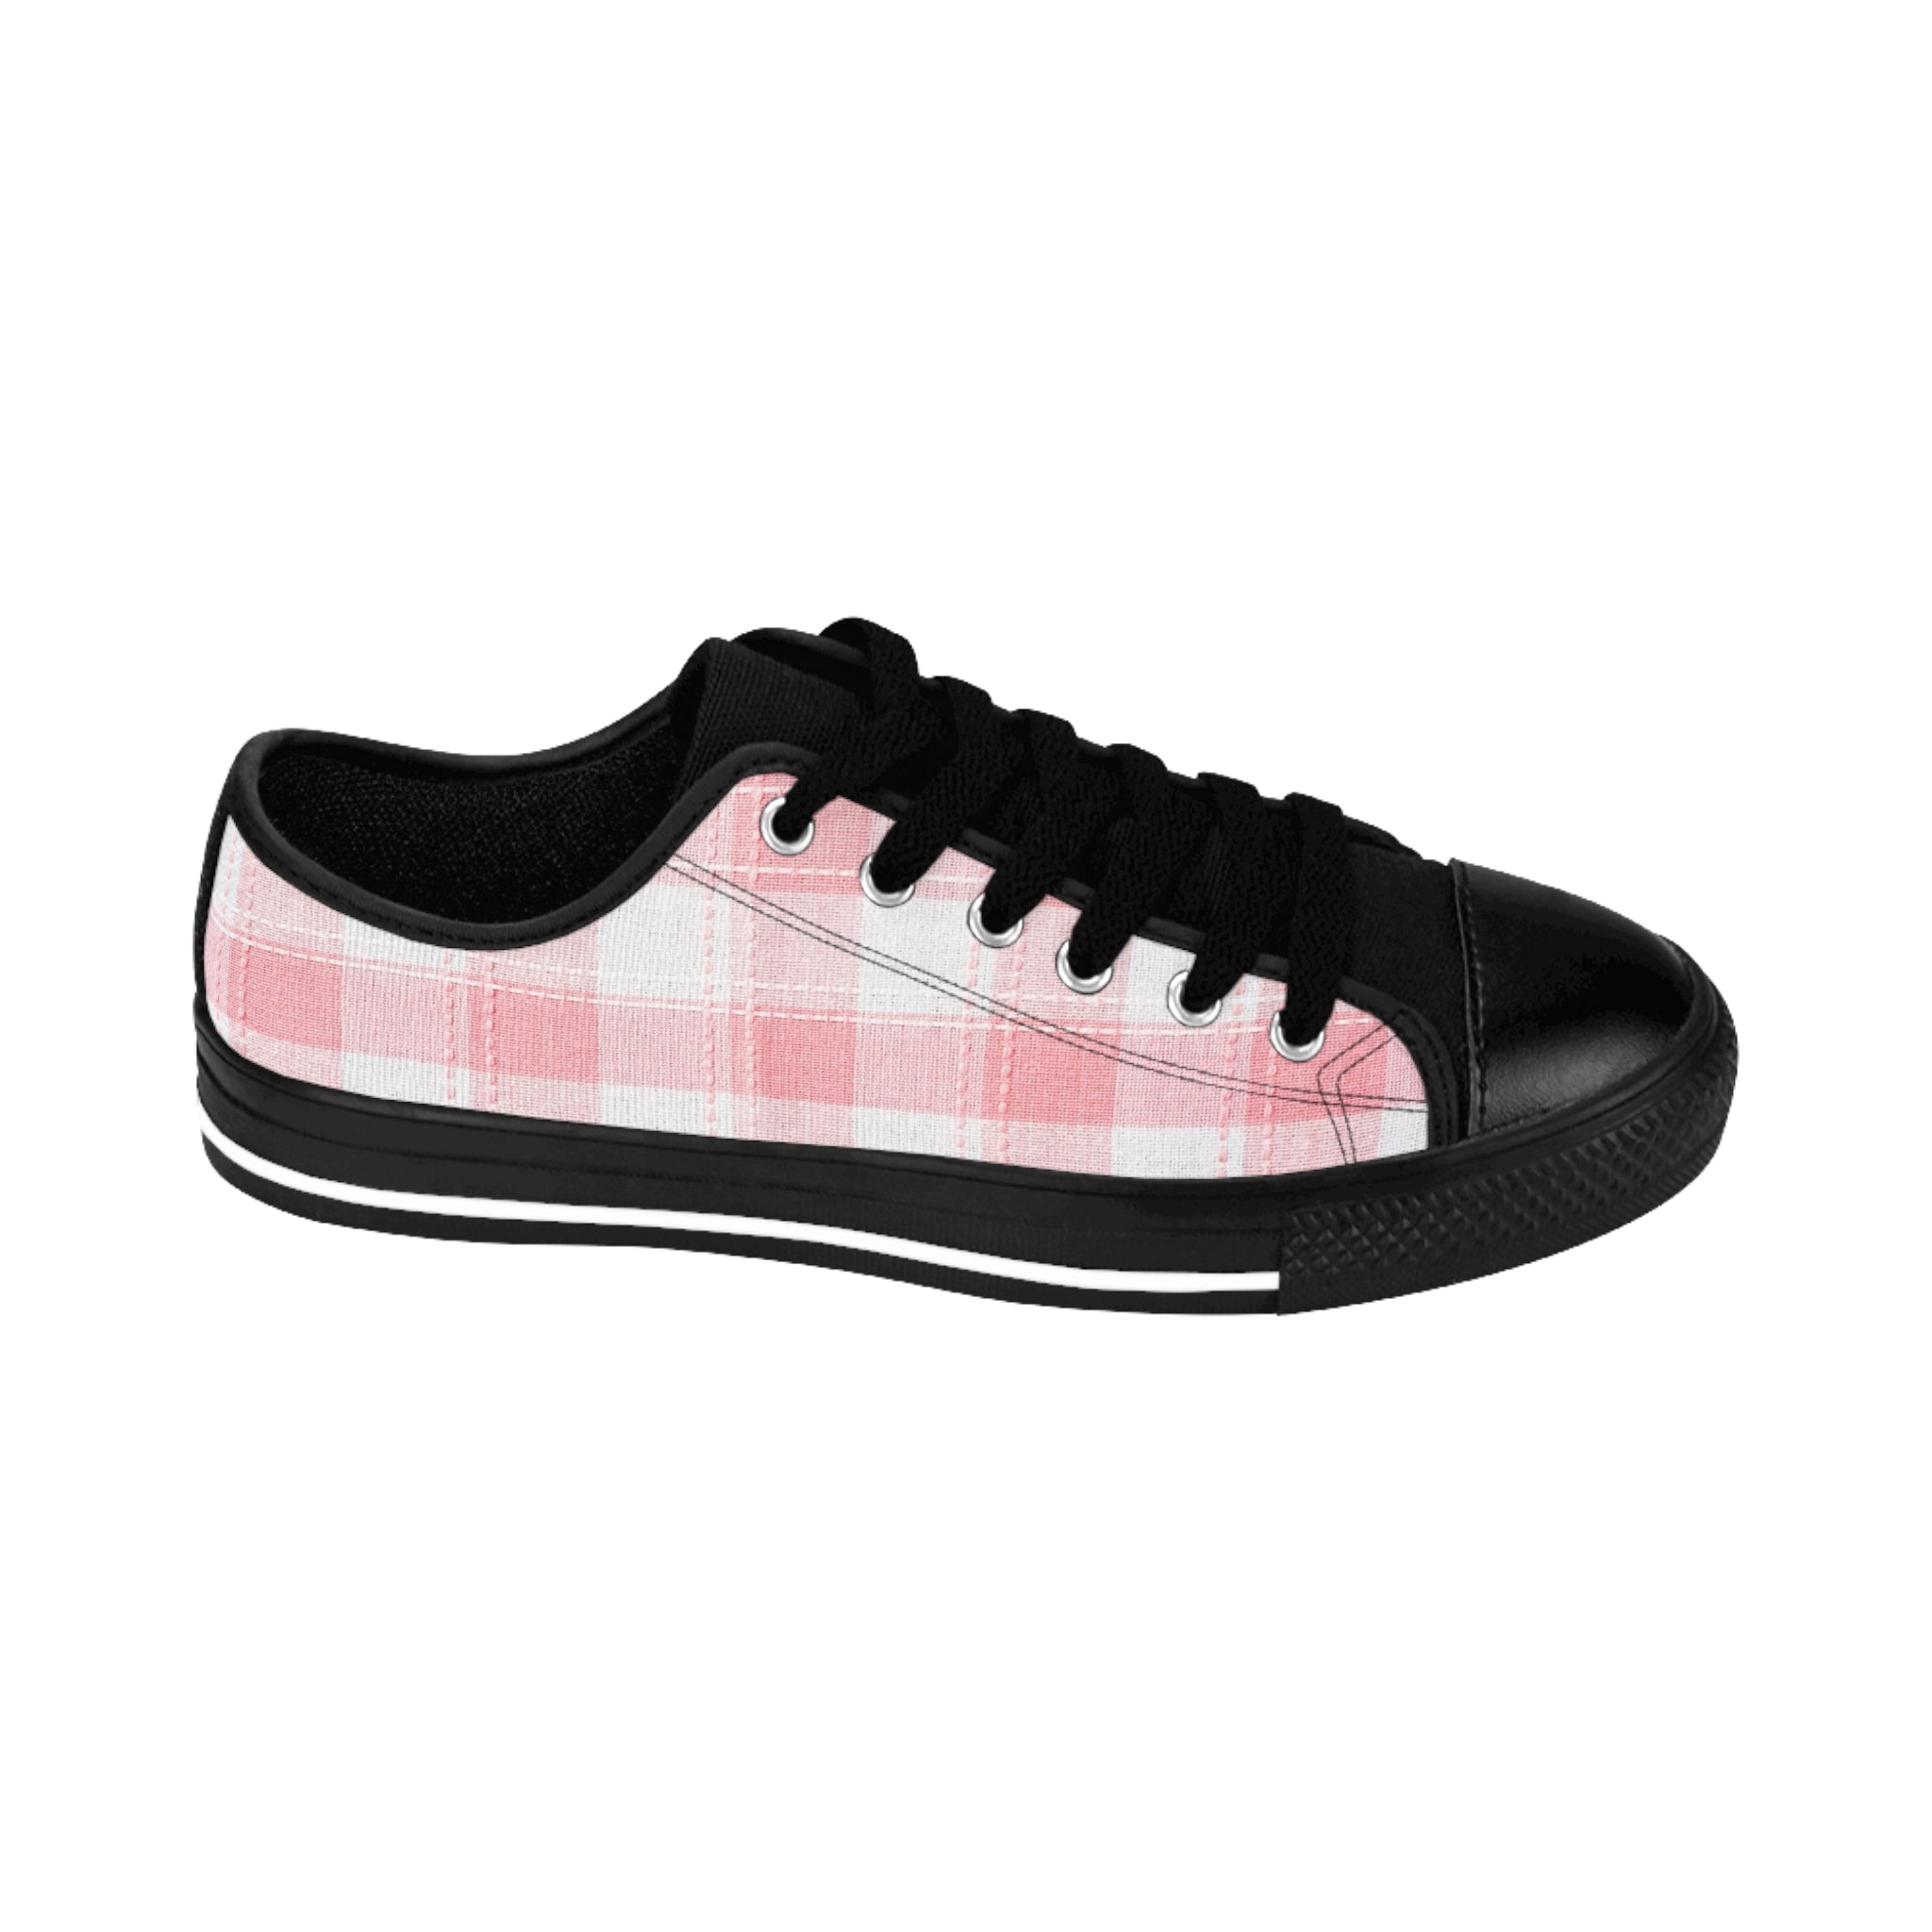 Designer Collection in Plaid (Pink) Women's Low Top Canvas Shoes Shoes US-11-Black-sole The Middle Aged Groove